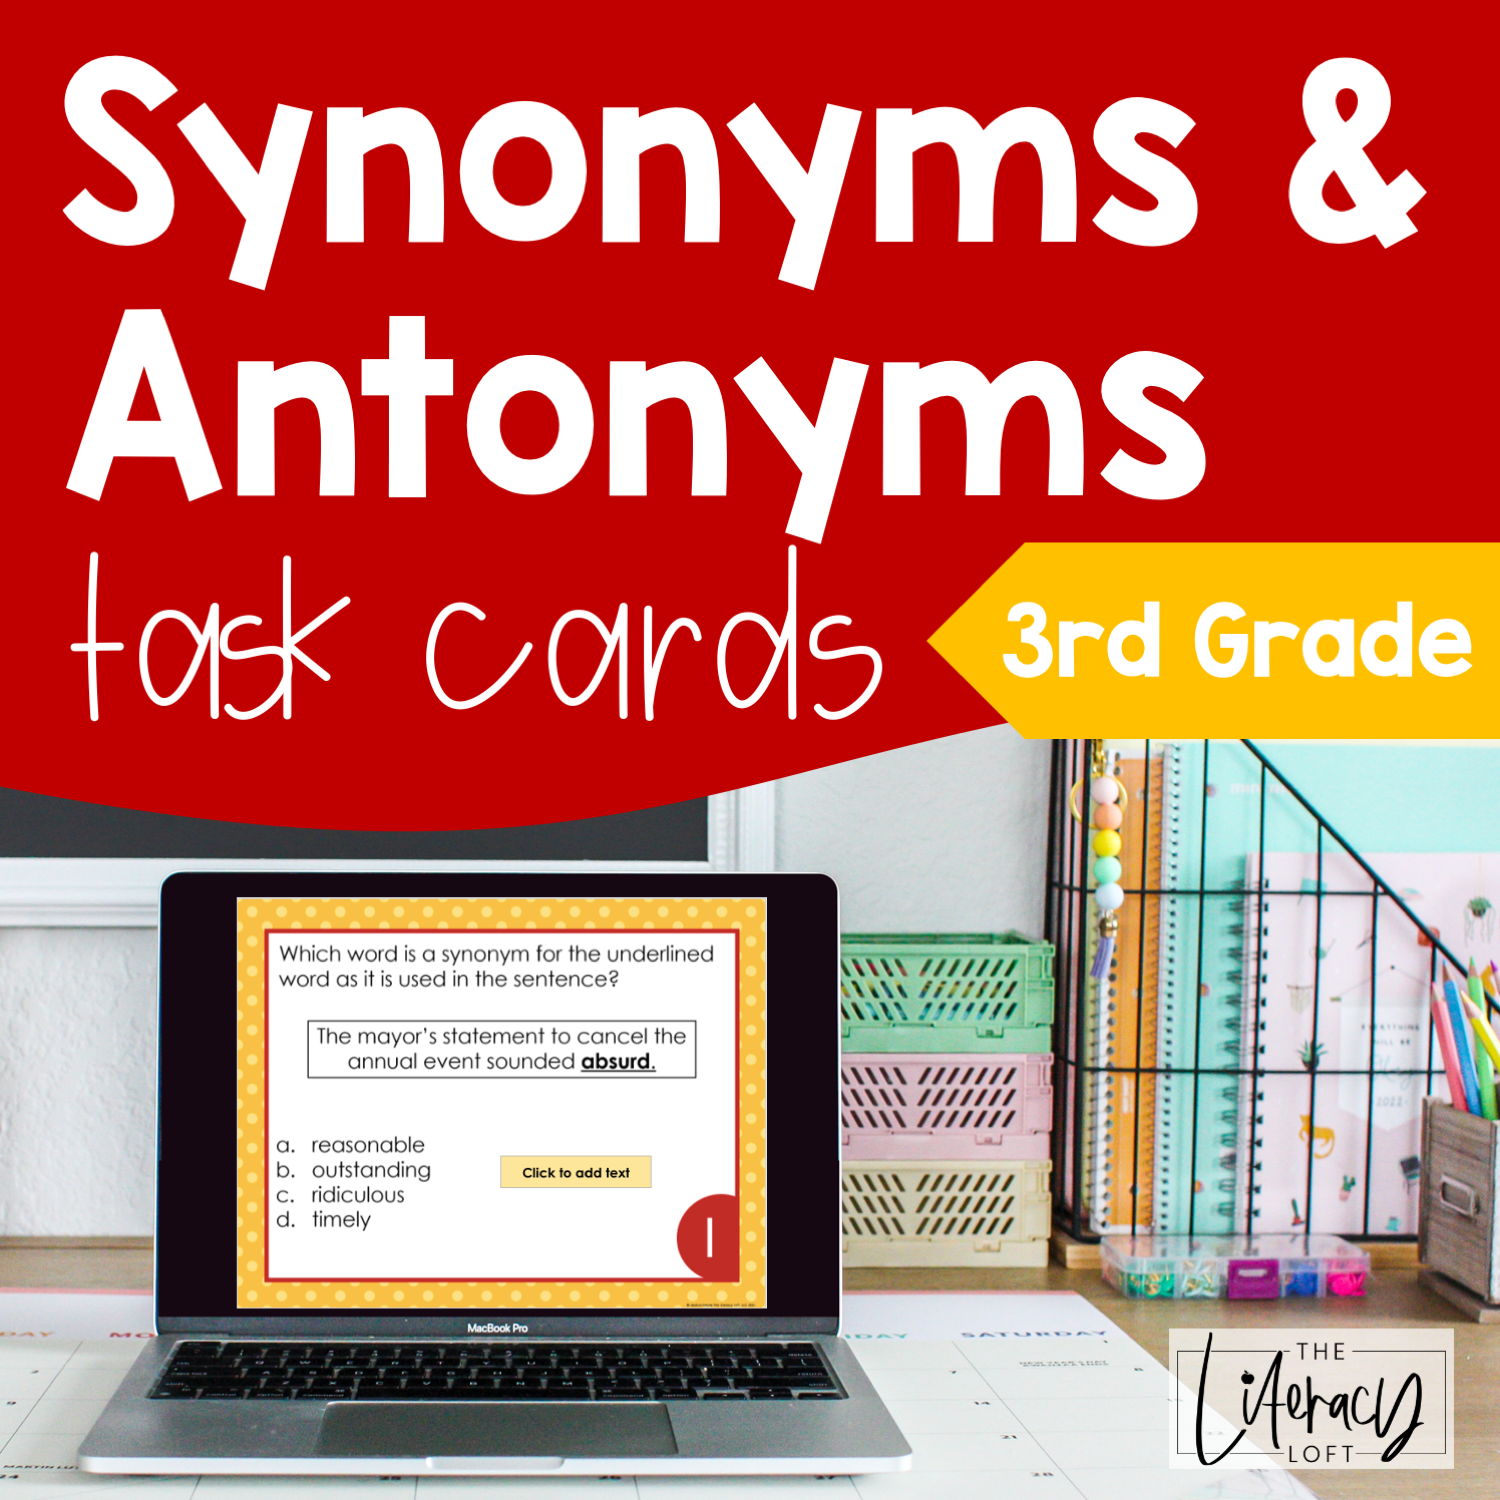 stockade synonyms, antonyms and definitions, Online thesaurus